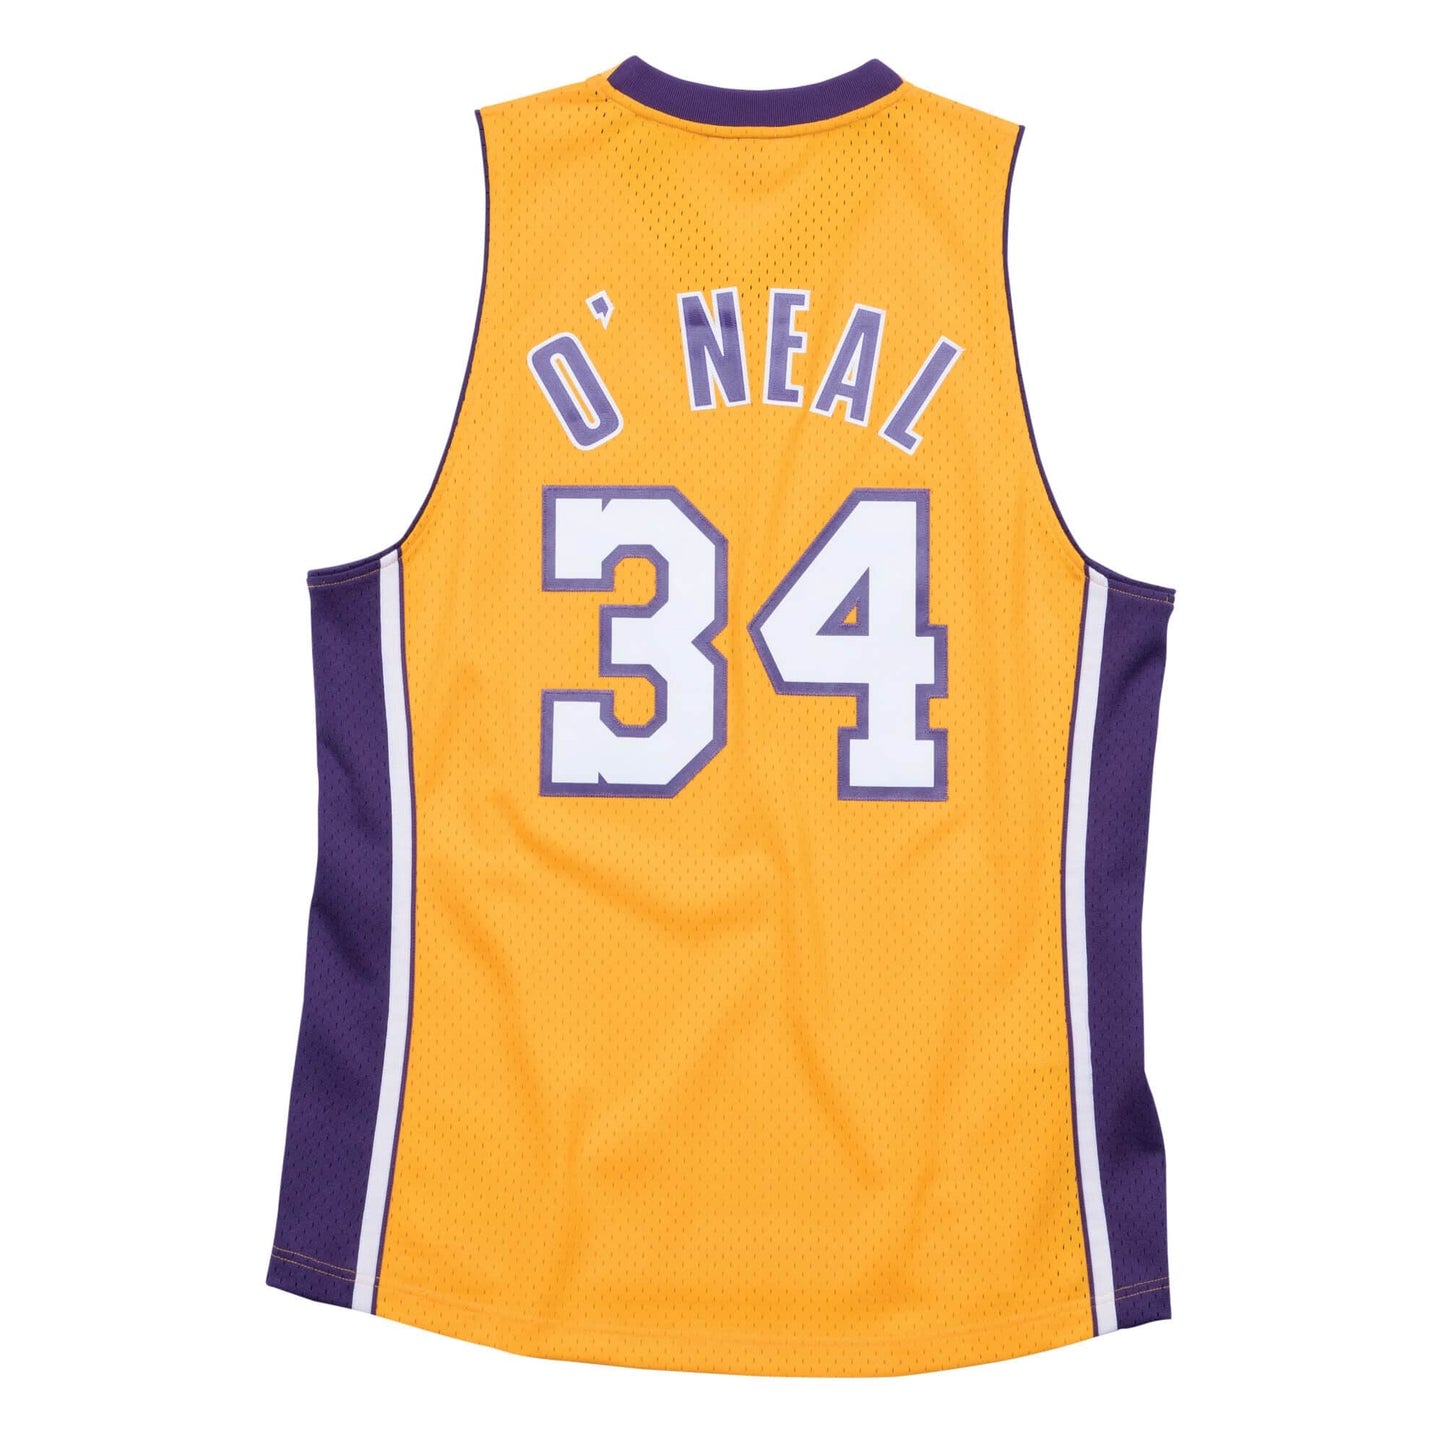 Los Angeles Lakers - Shaquille O’neal Jersey